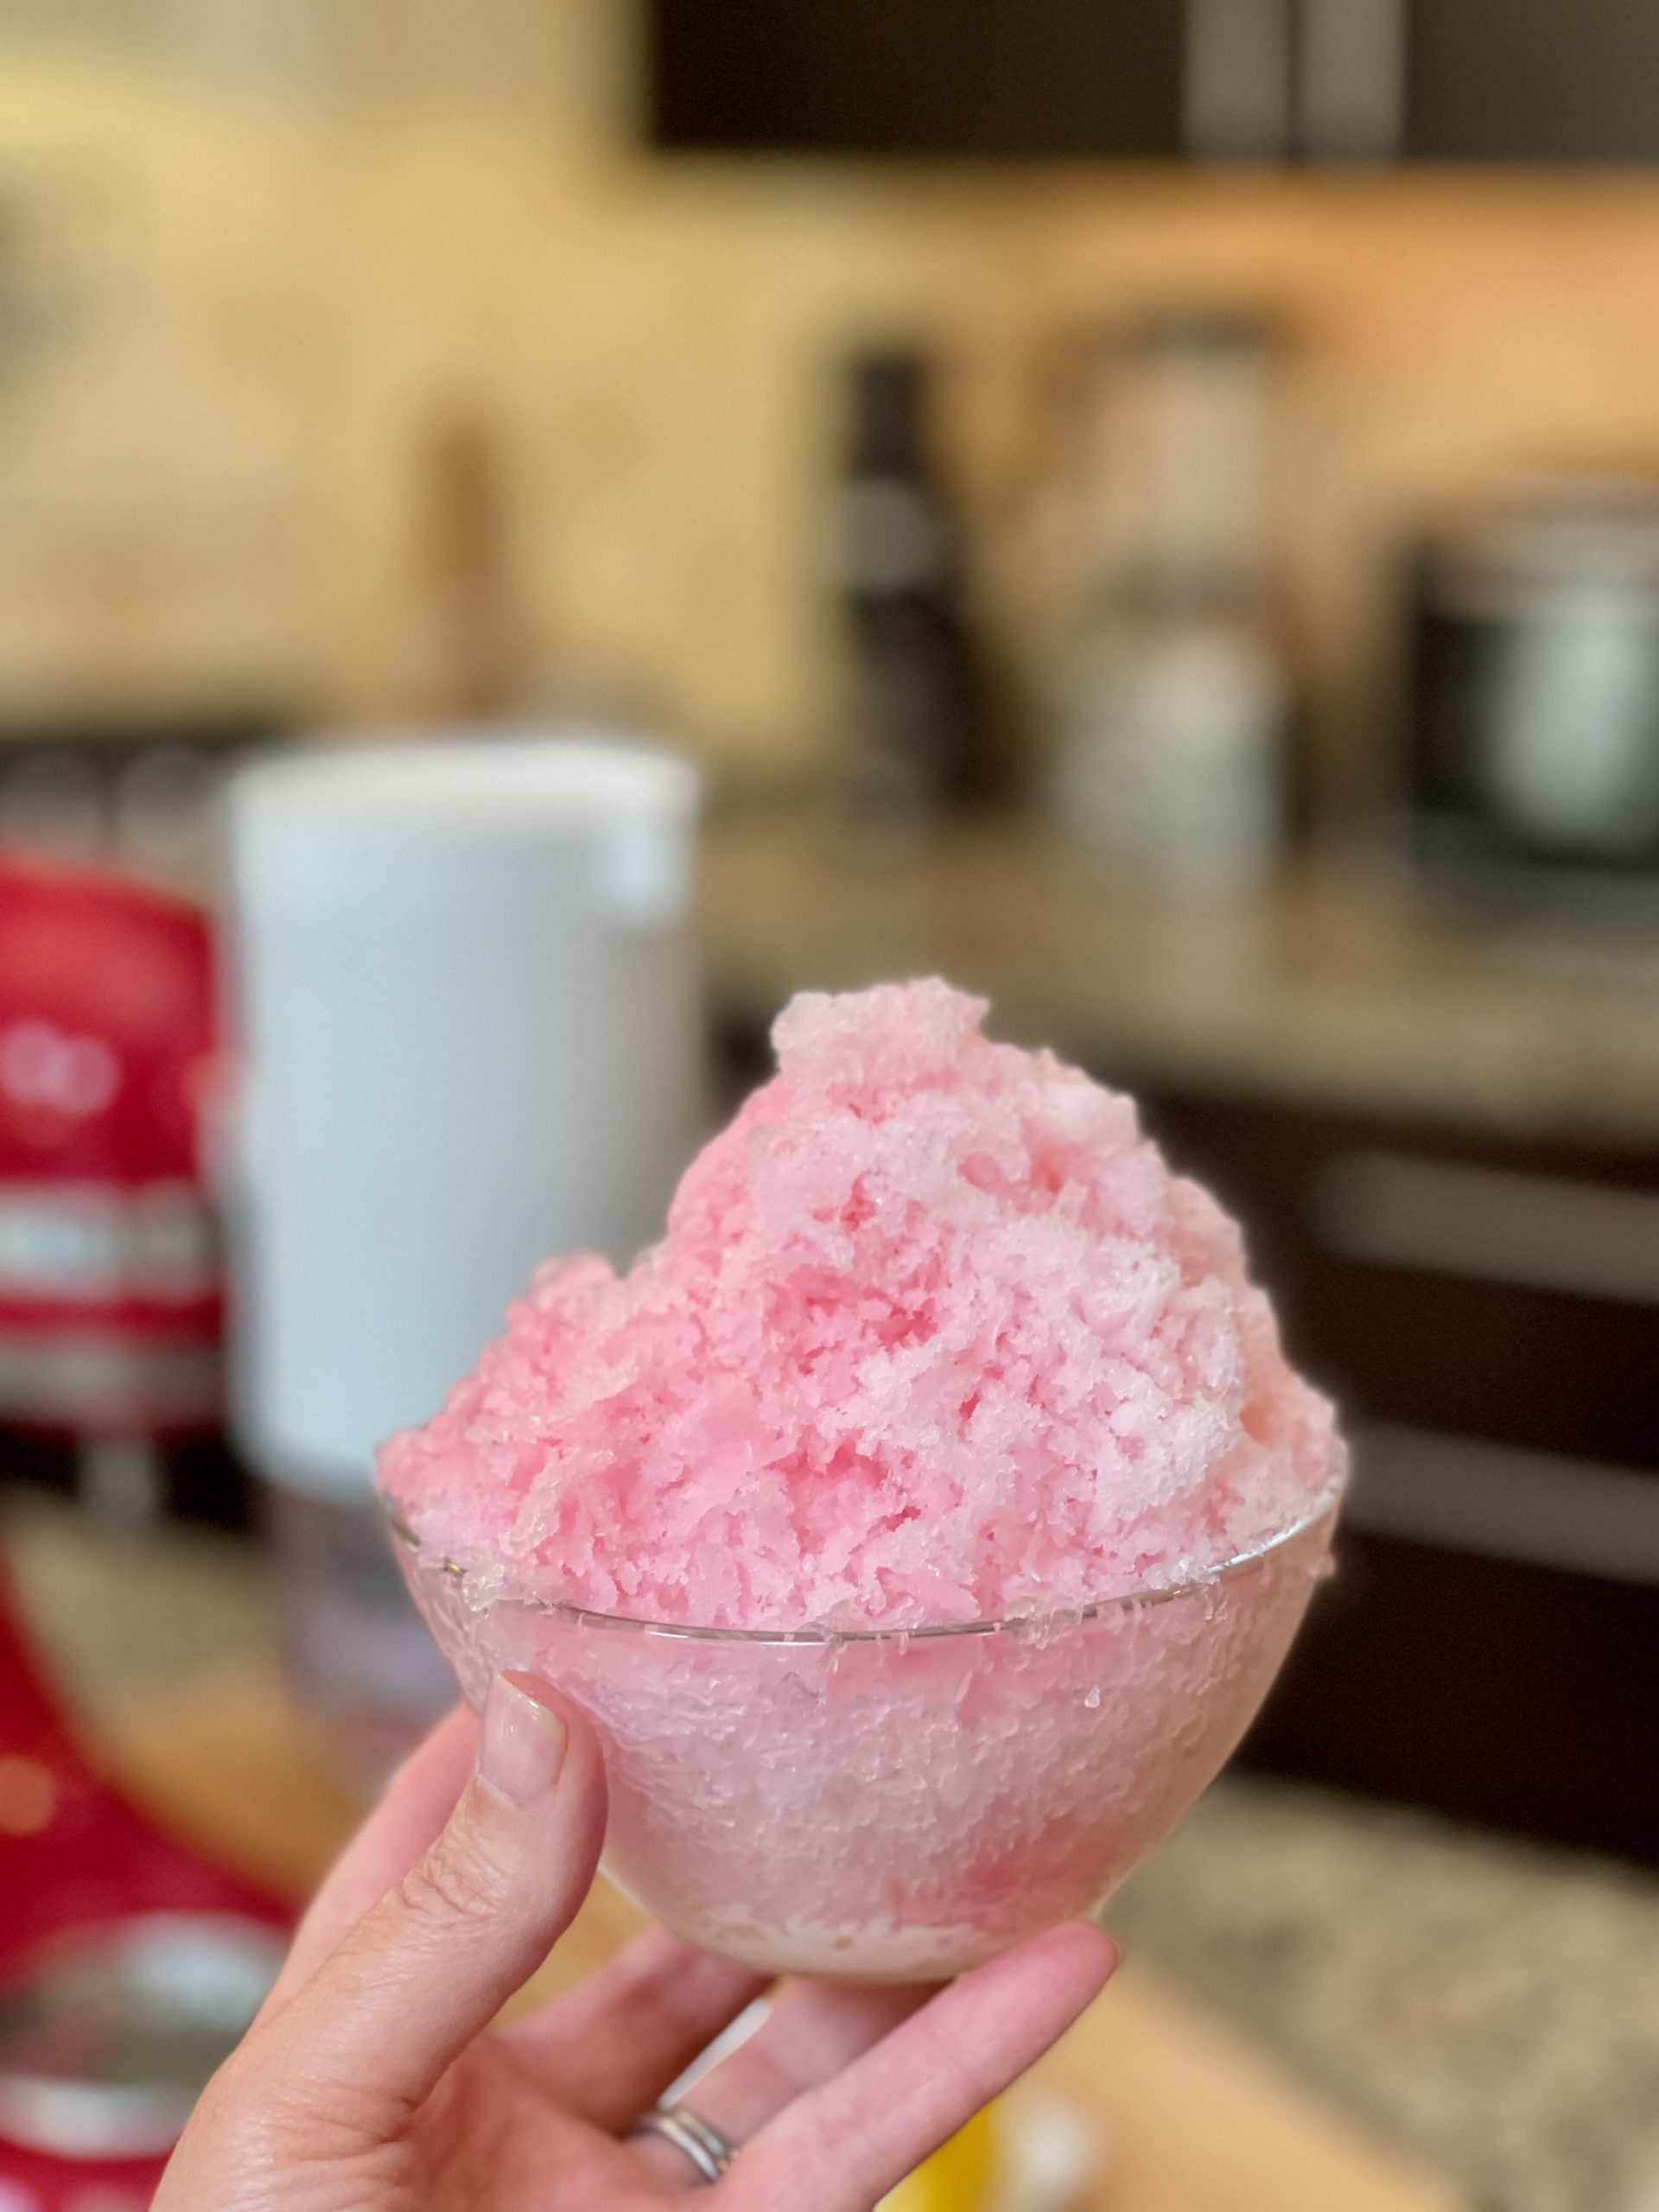 How to Make Shave Ice with KitchenAid Shave Ice Attachment